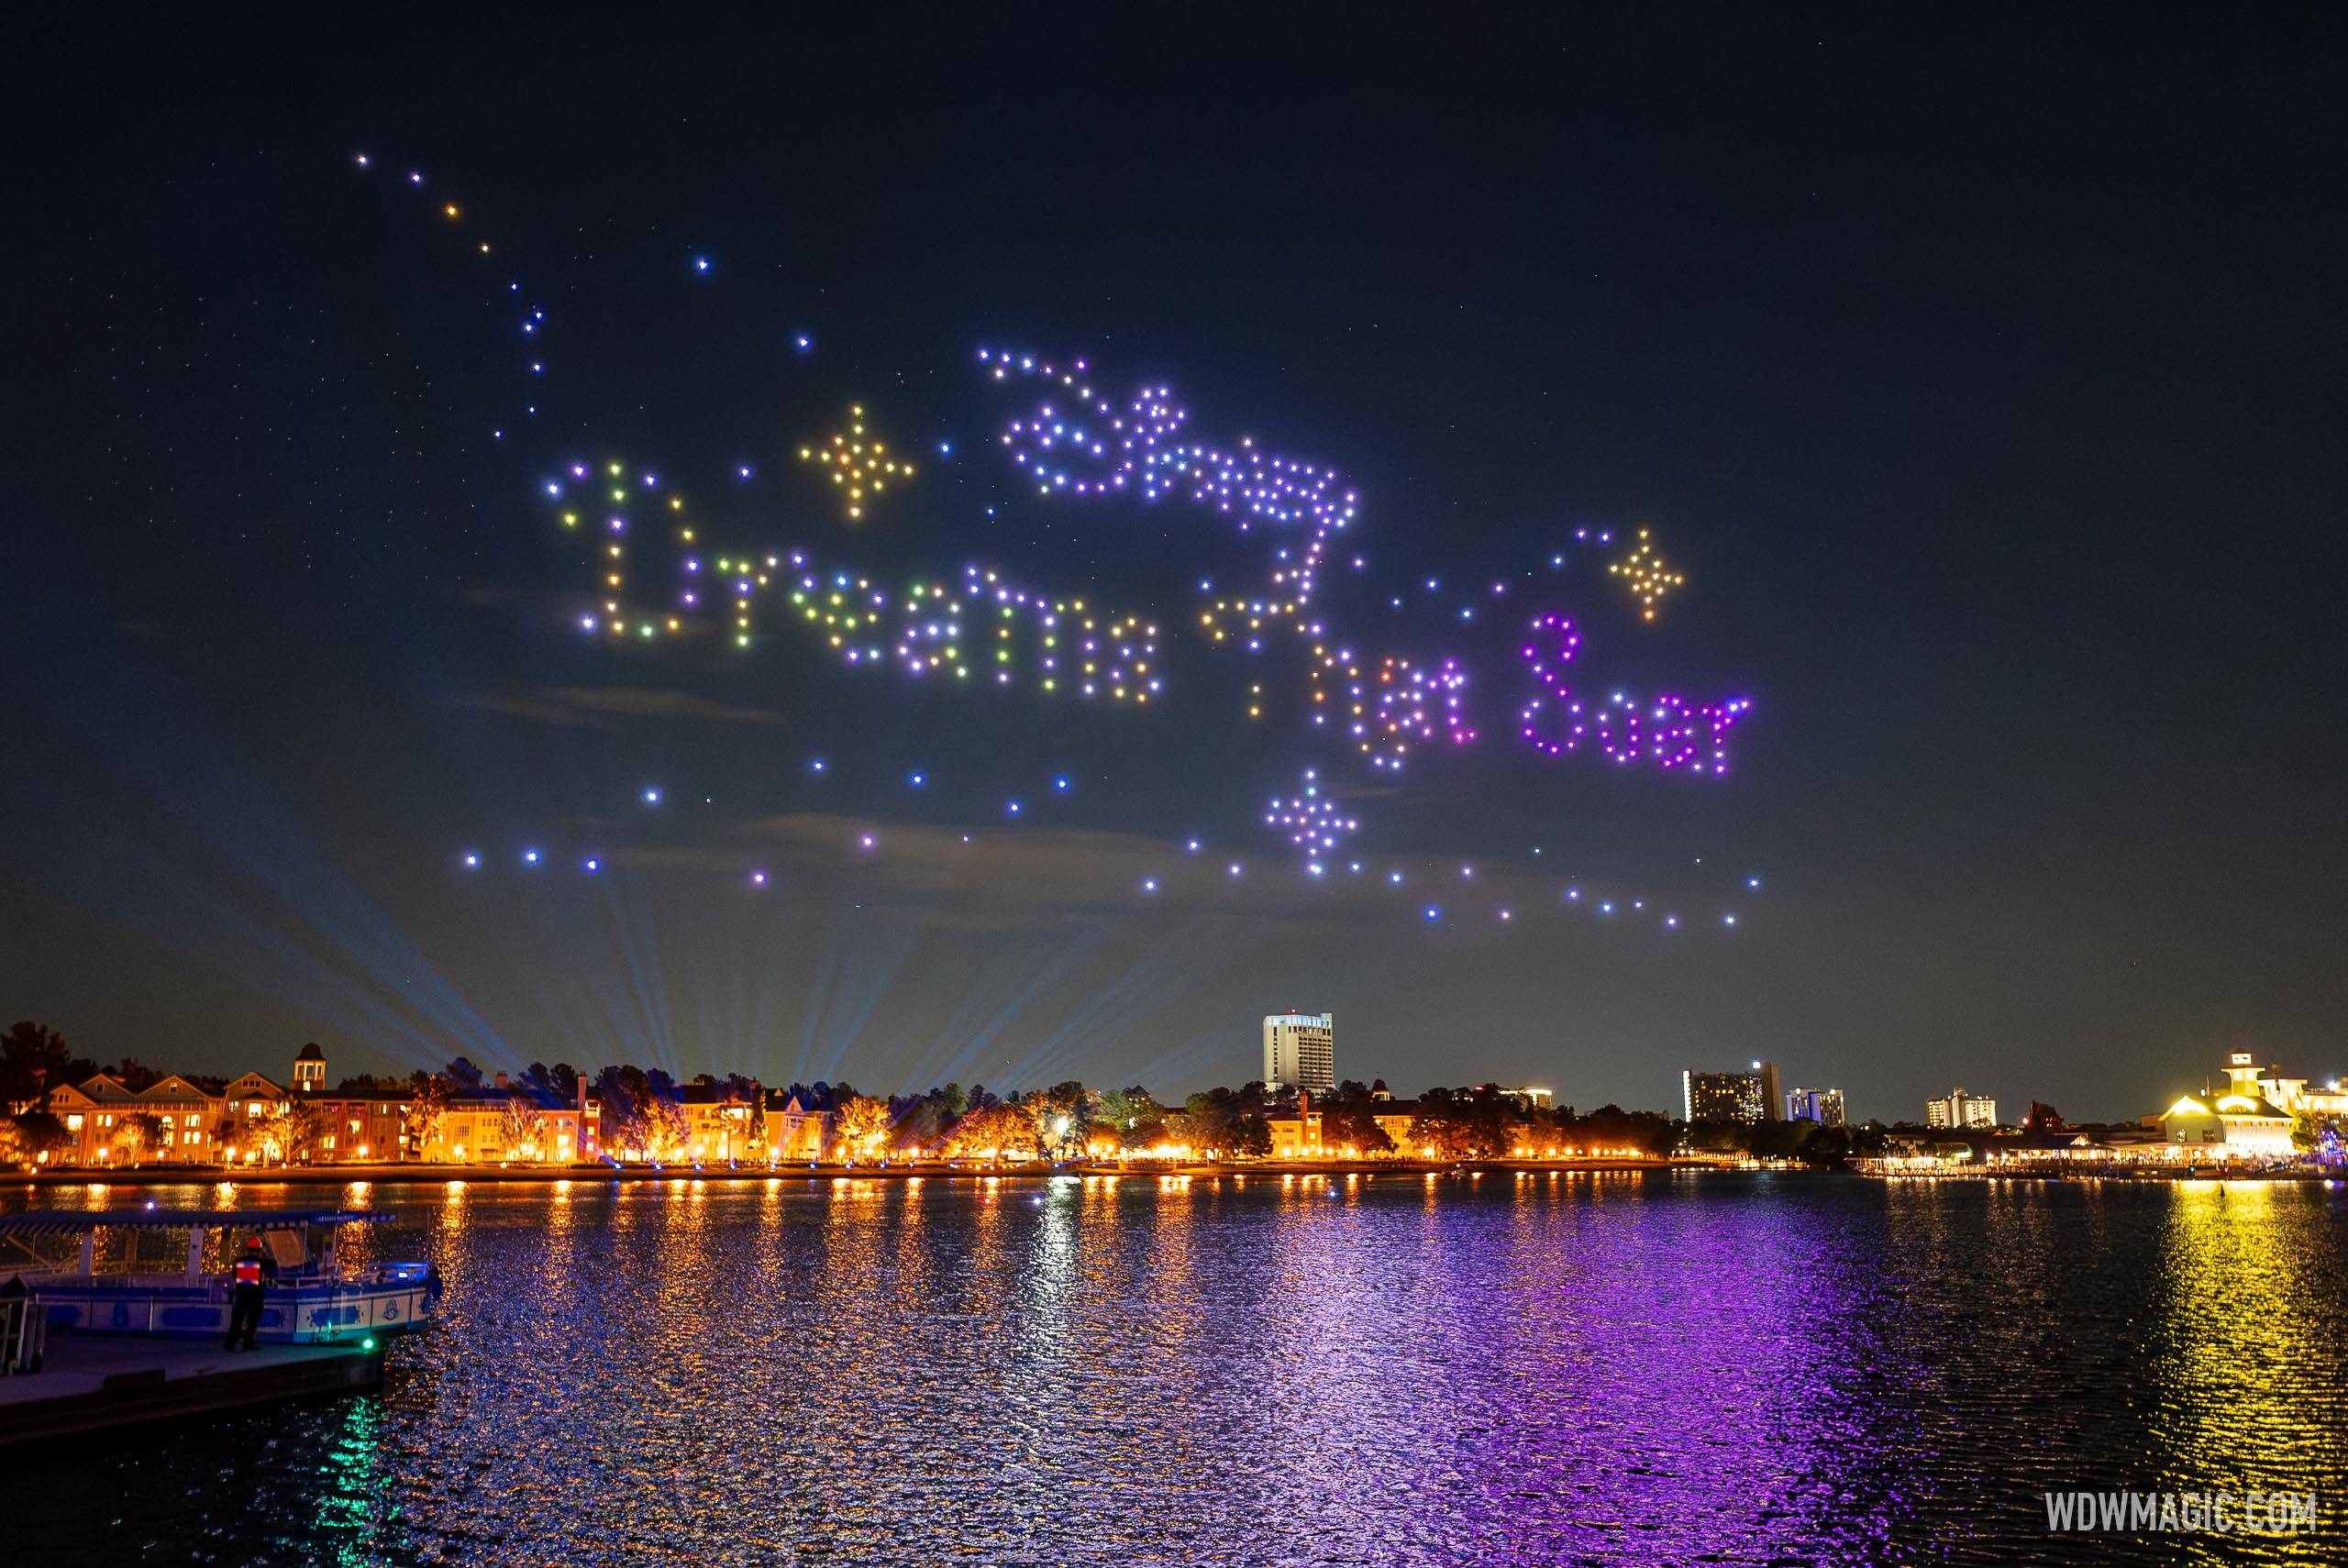 Disney Dreams that Soar viewed from the West Side